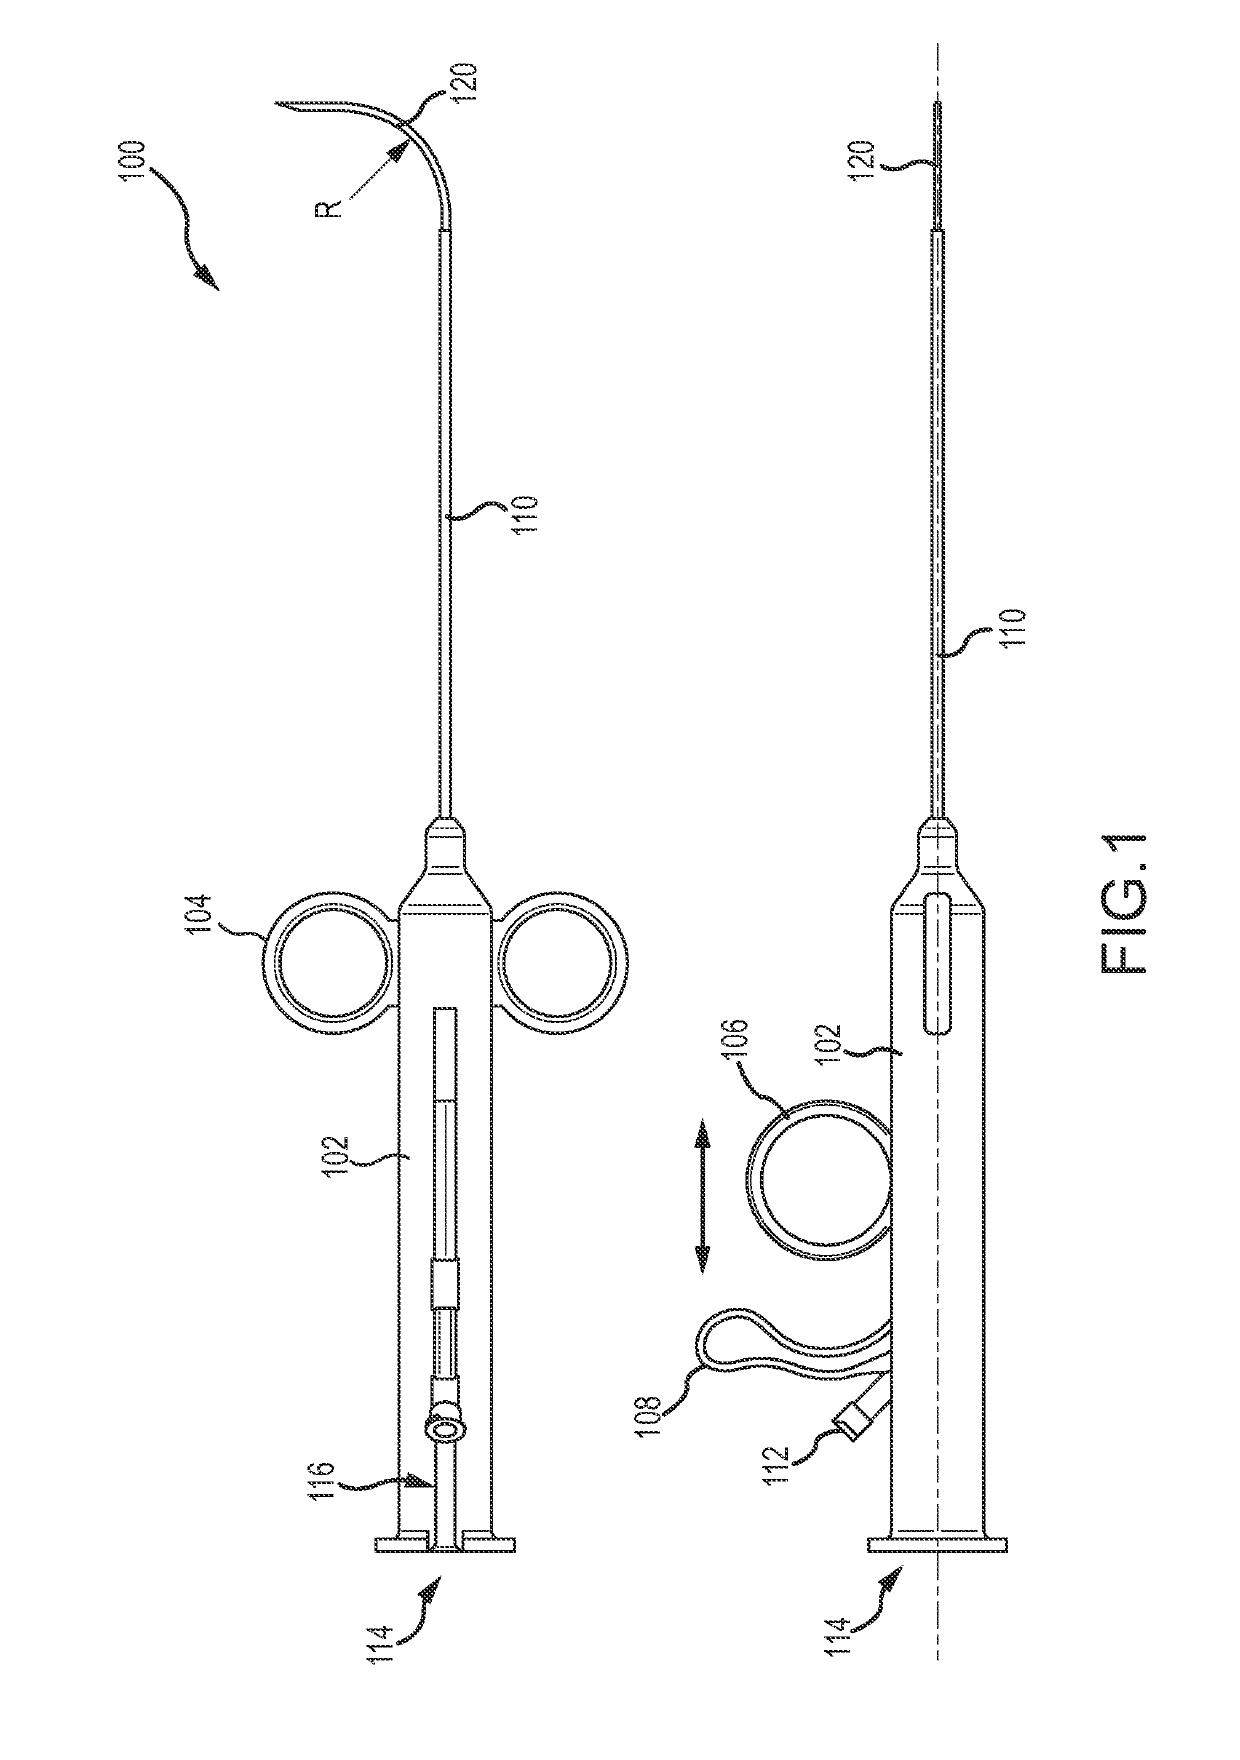 Cardiac tissue penetrating devices, methods, and systems for treatment of congestive heart failure and other conditions